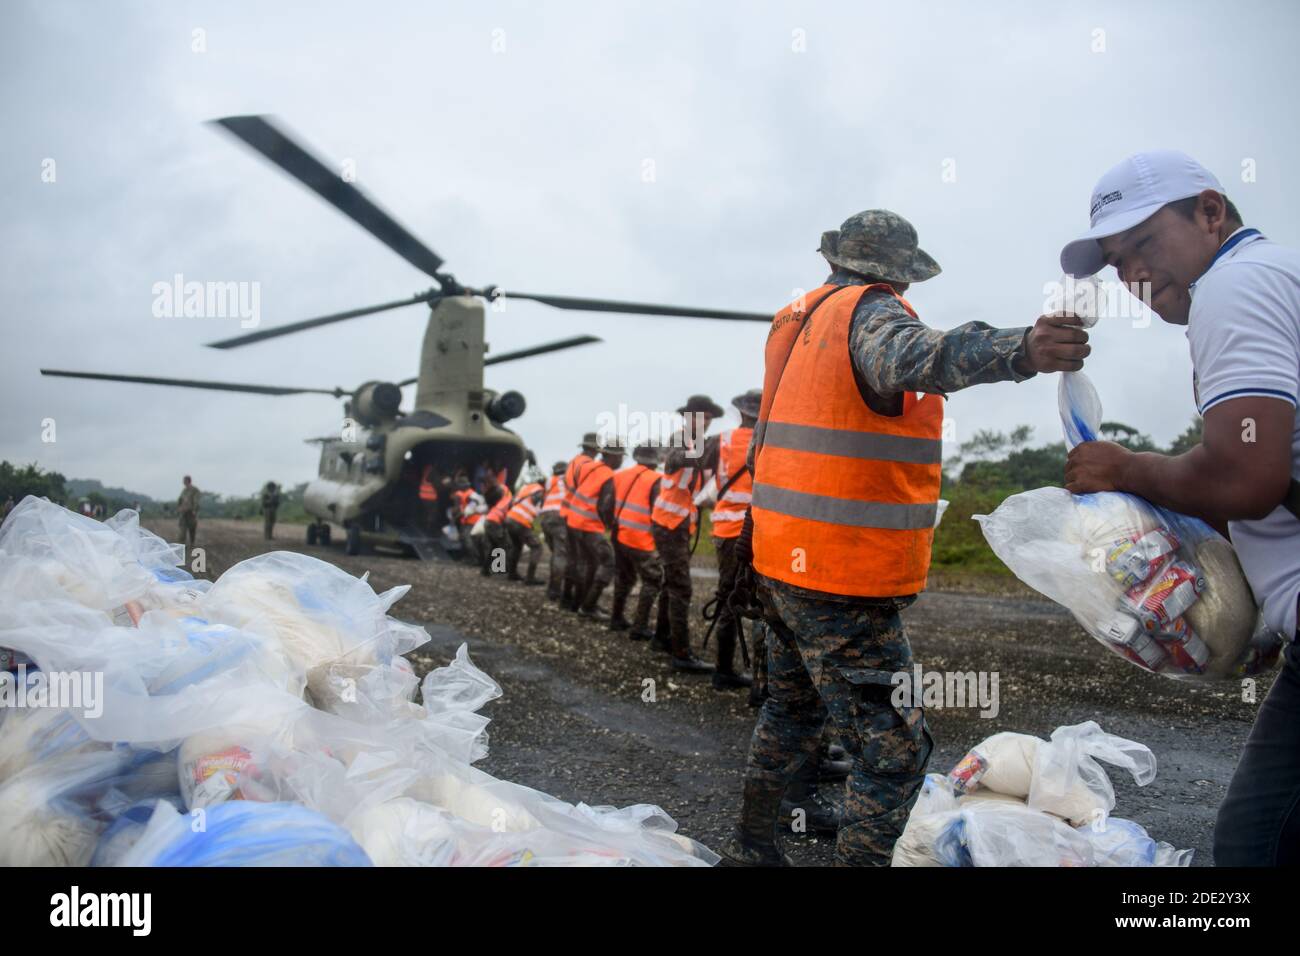 Guatemalan Armed Forces and civilians unload humanitarian aid from a U.S. Army CH-47 Chinook helicopter November 26, 2020 in Rubelsanto, Guatemala. Hurricane Iota swept through Central America destroying large sections of the coast and flooding roads. Stock Photo